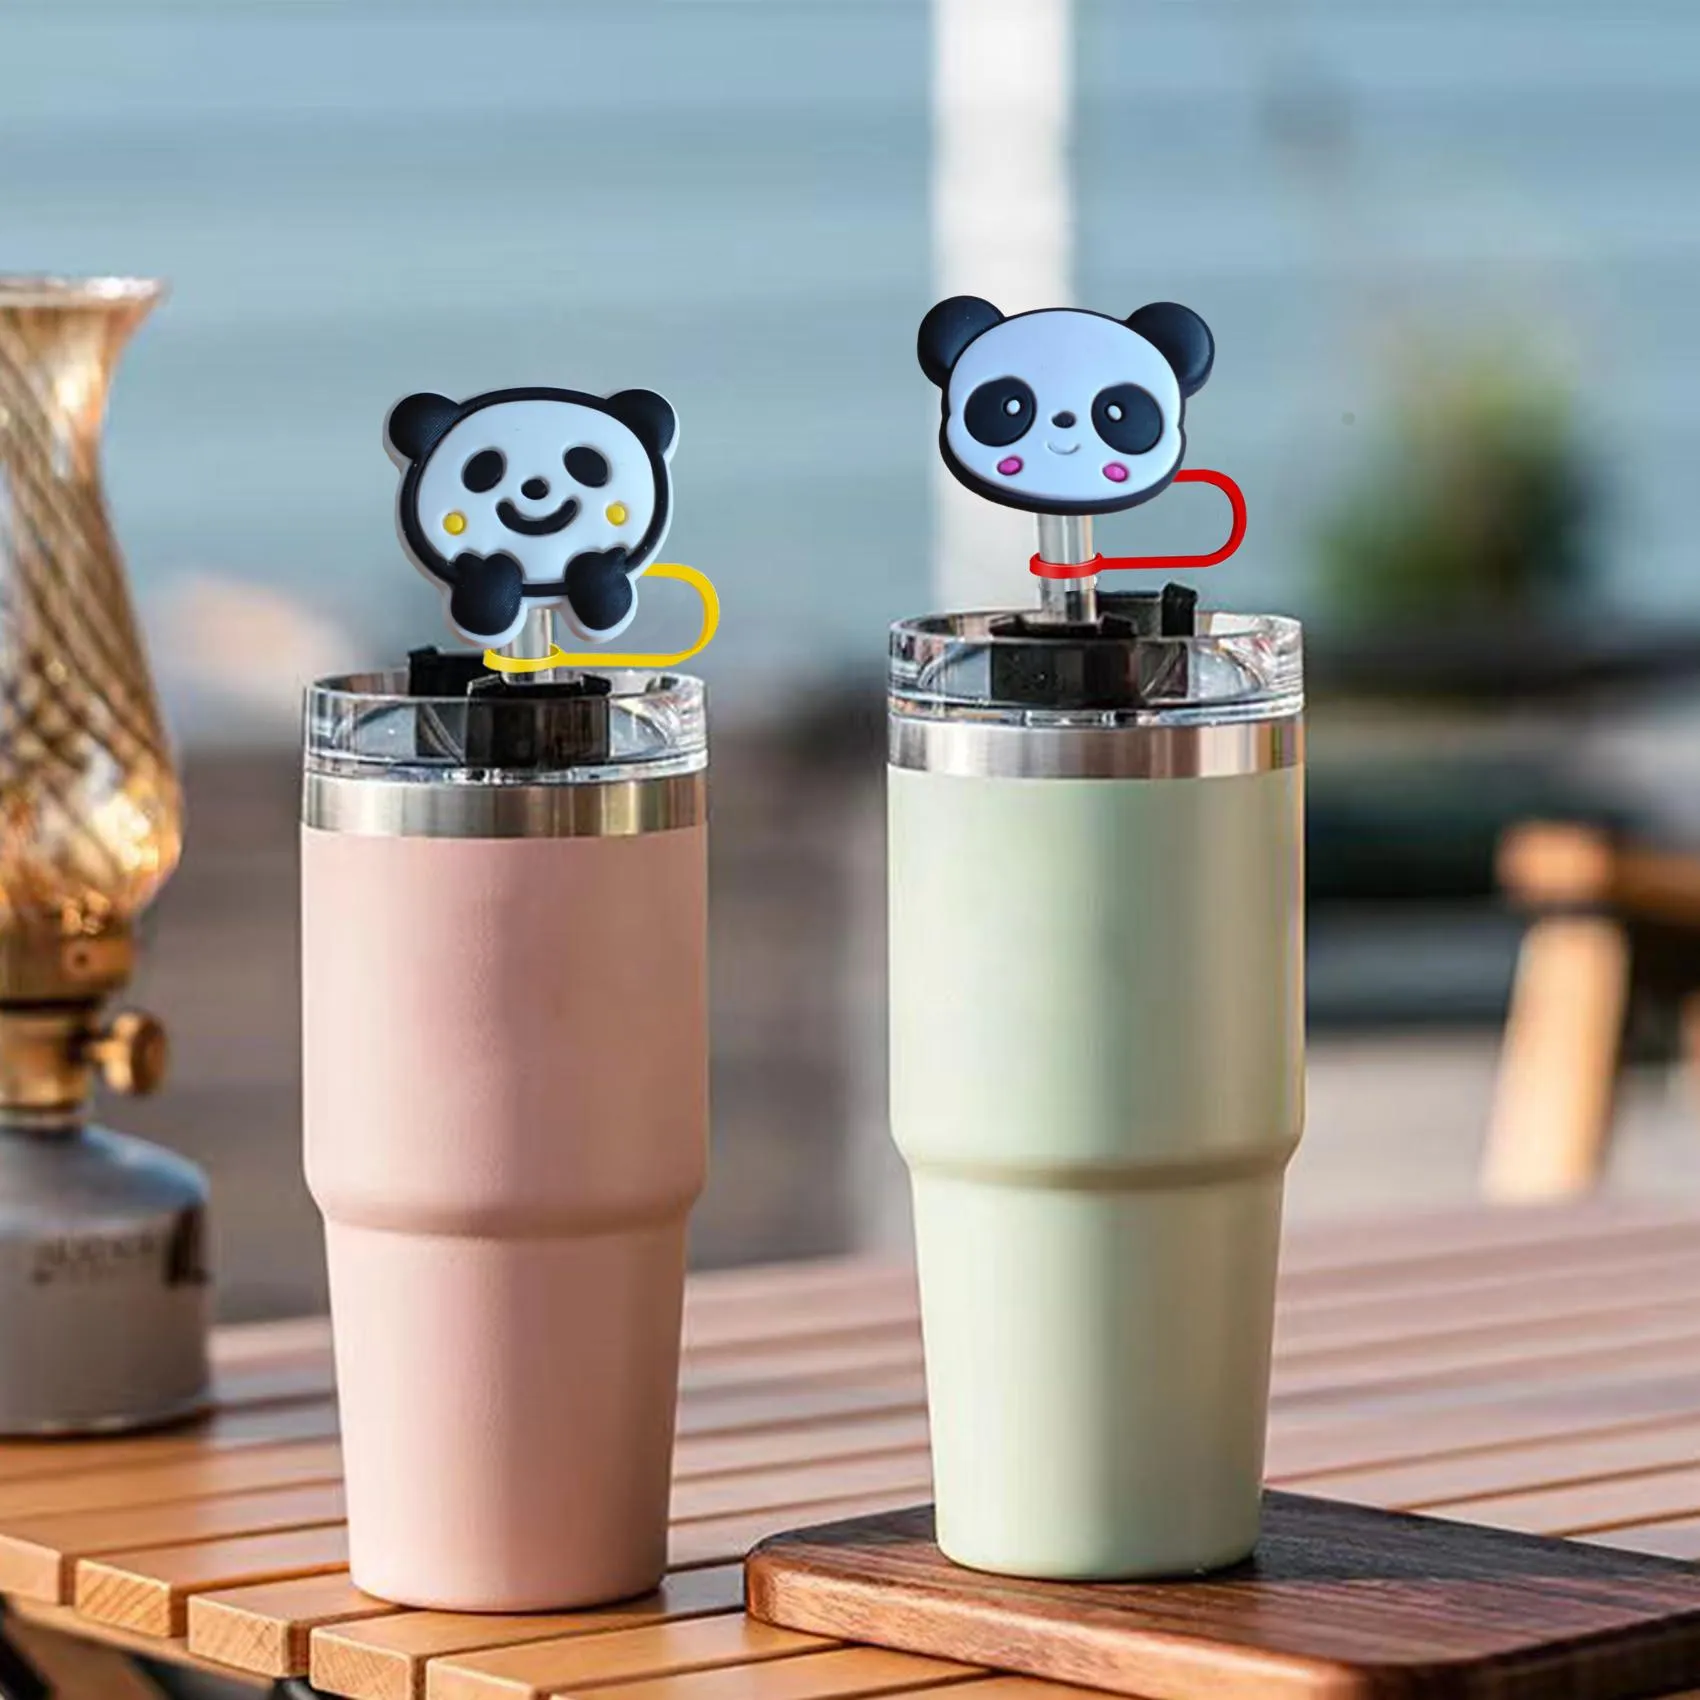 panda 12 straw cover for  cups silicone covers cup accessories cap fit straws suitable traveling picnicking topper pack of 10mm